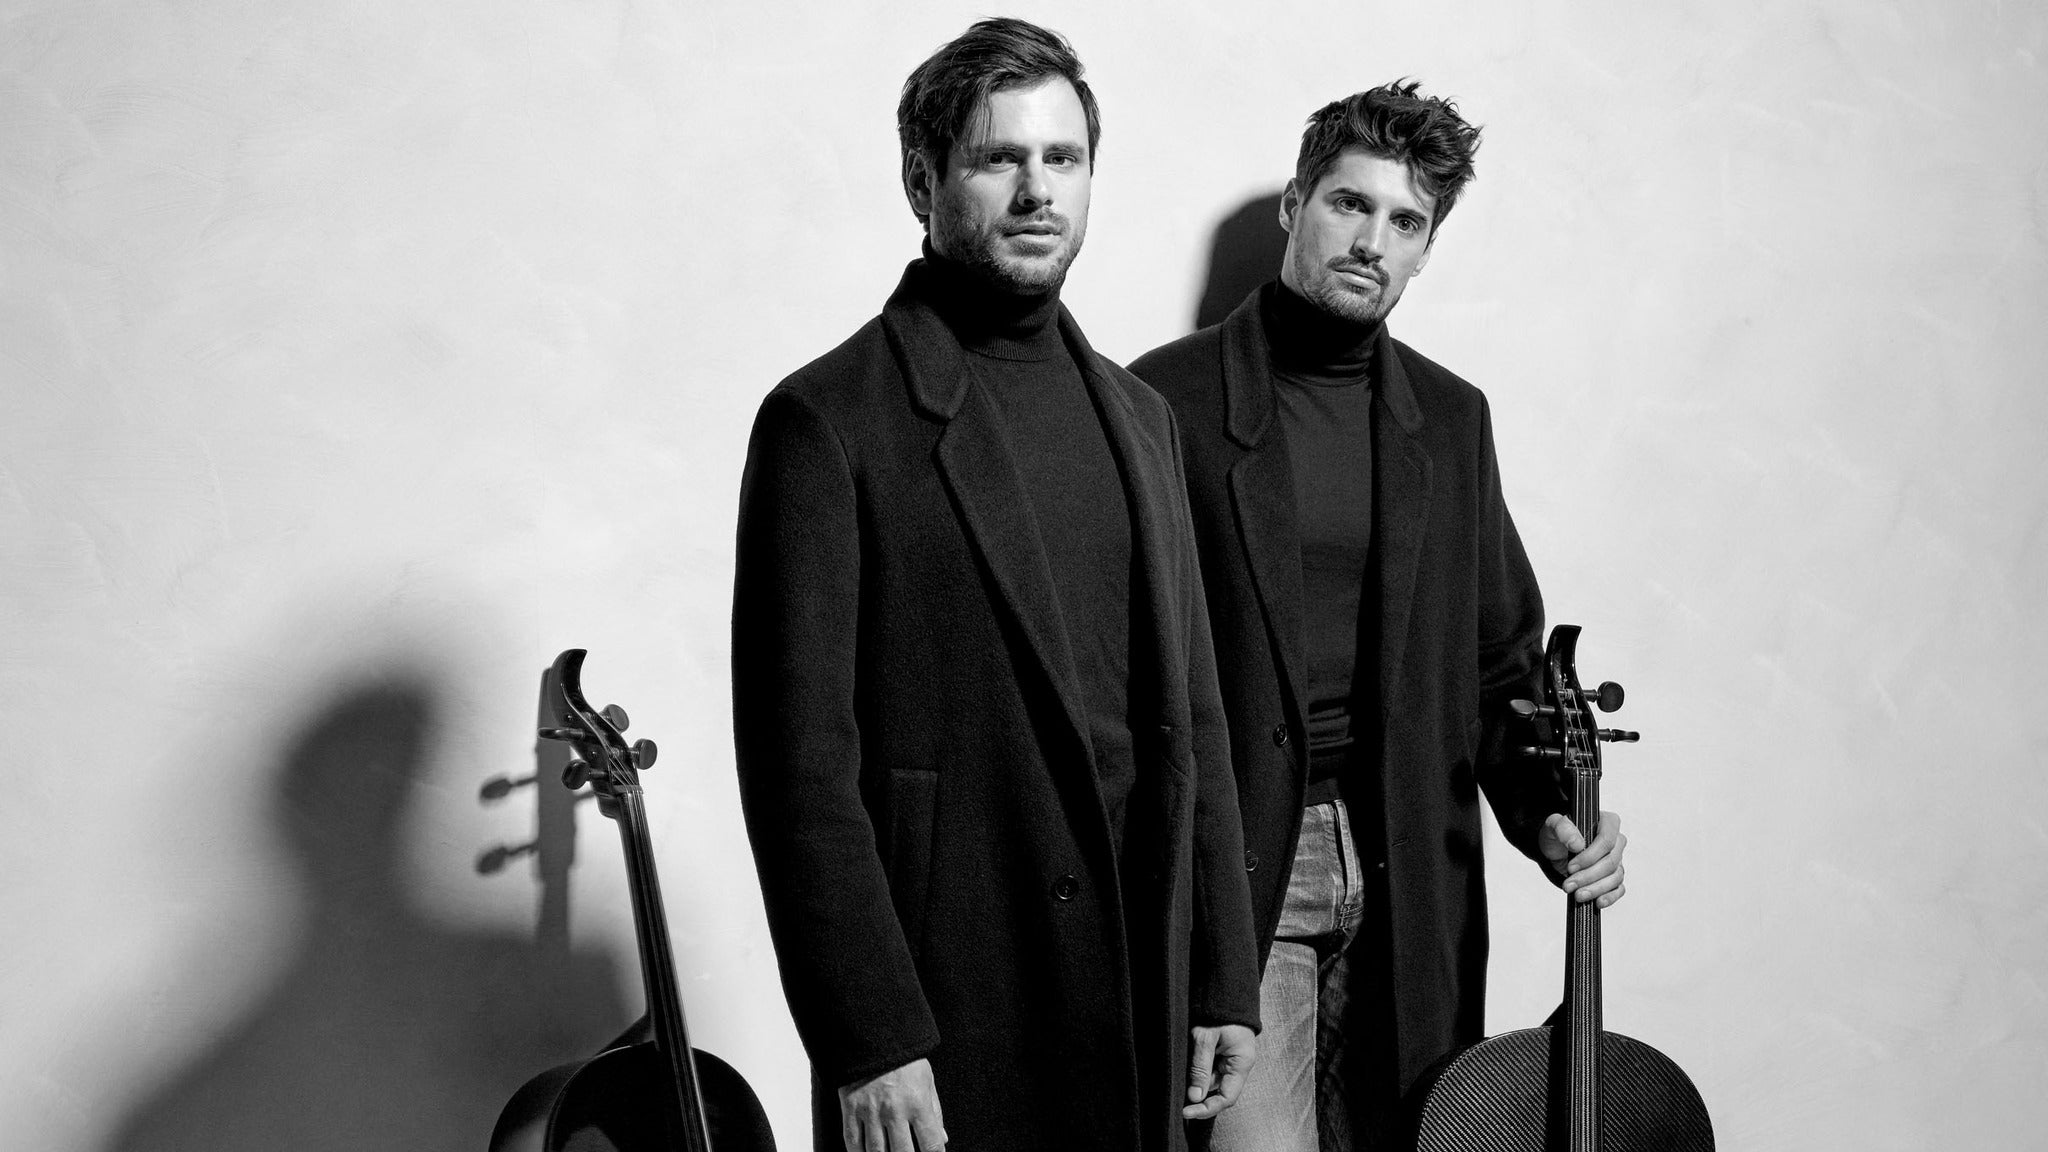 2CELLOS The Dedicated Tour in DPAC Durham Performing Arts Center in